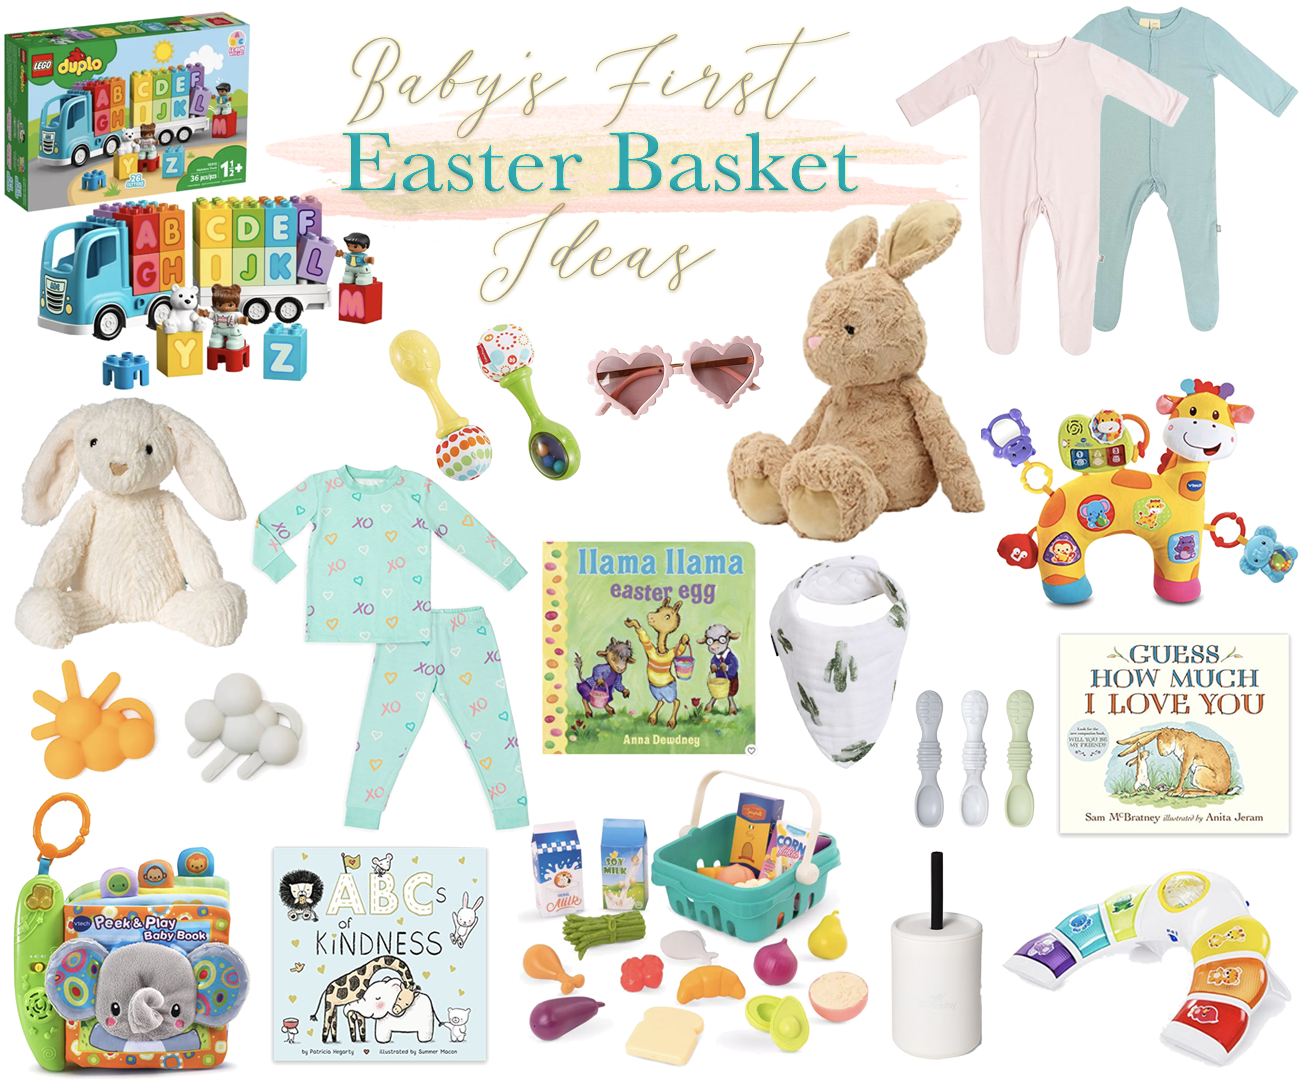 Babys First Easter Basket Ideas March 2021 